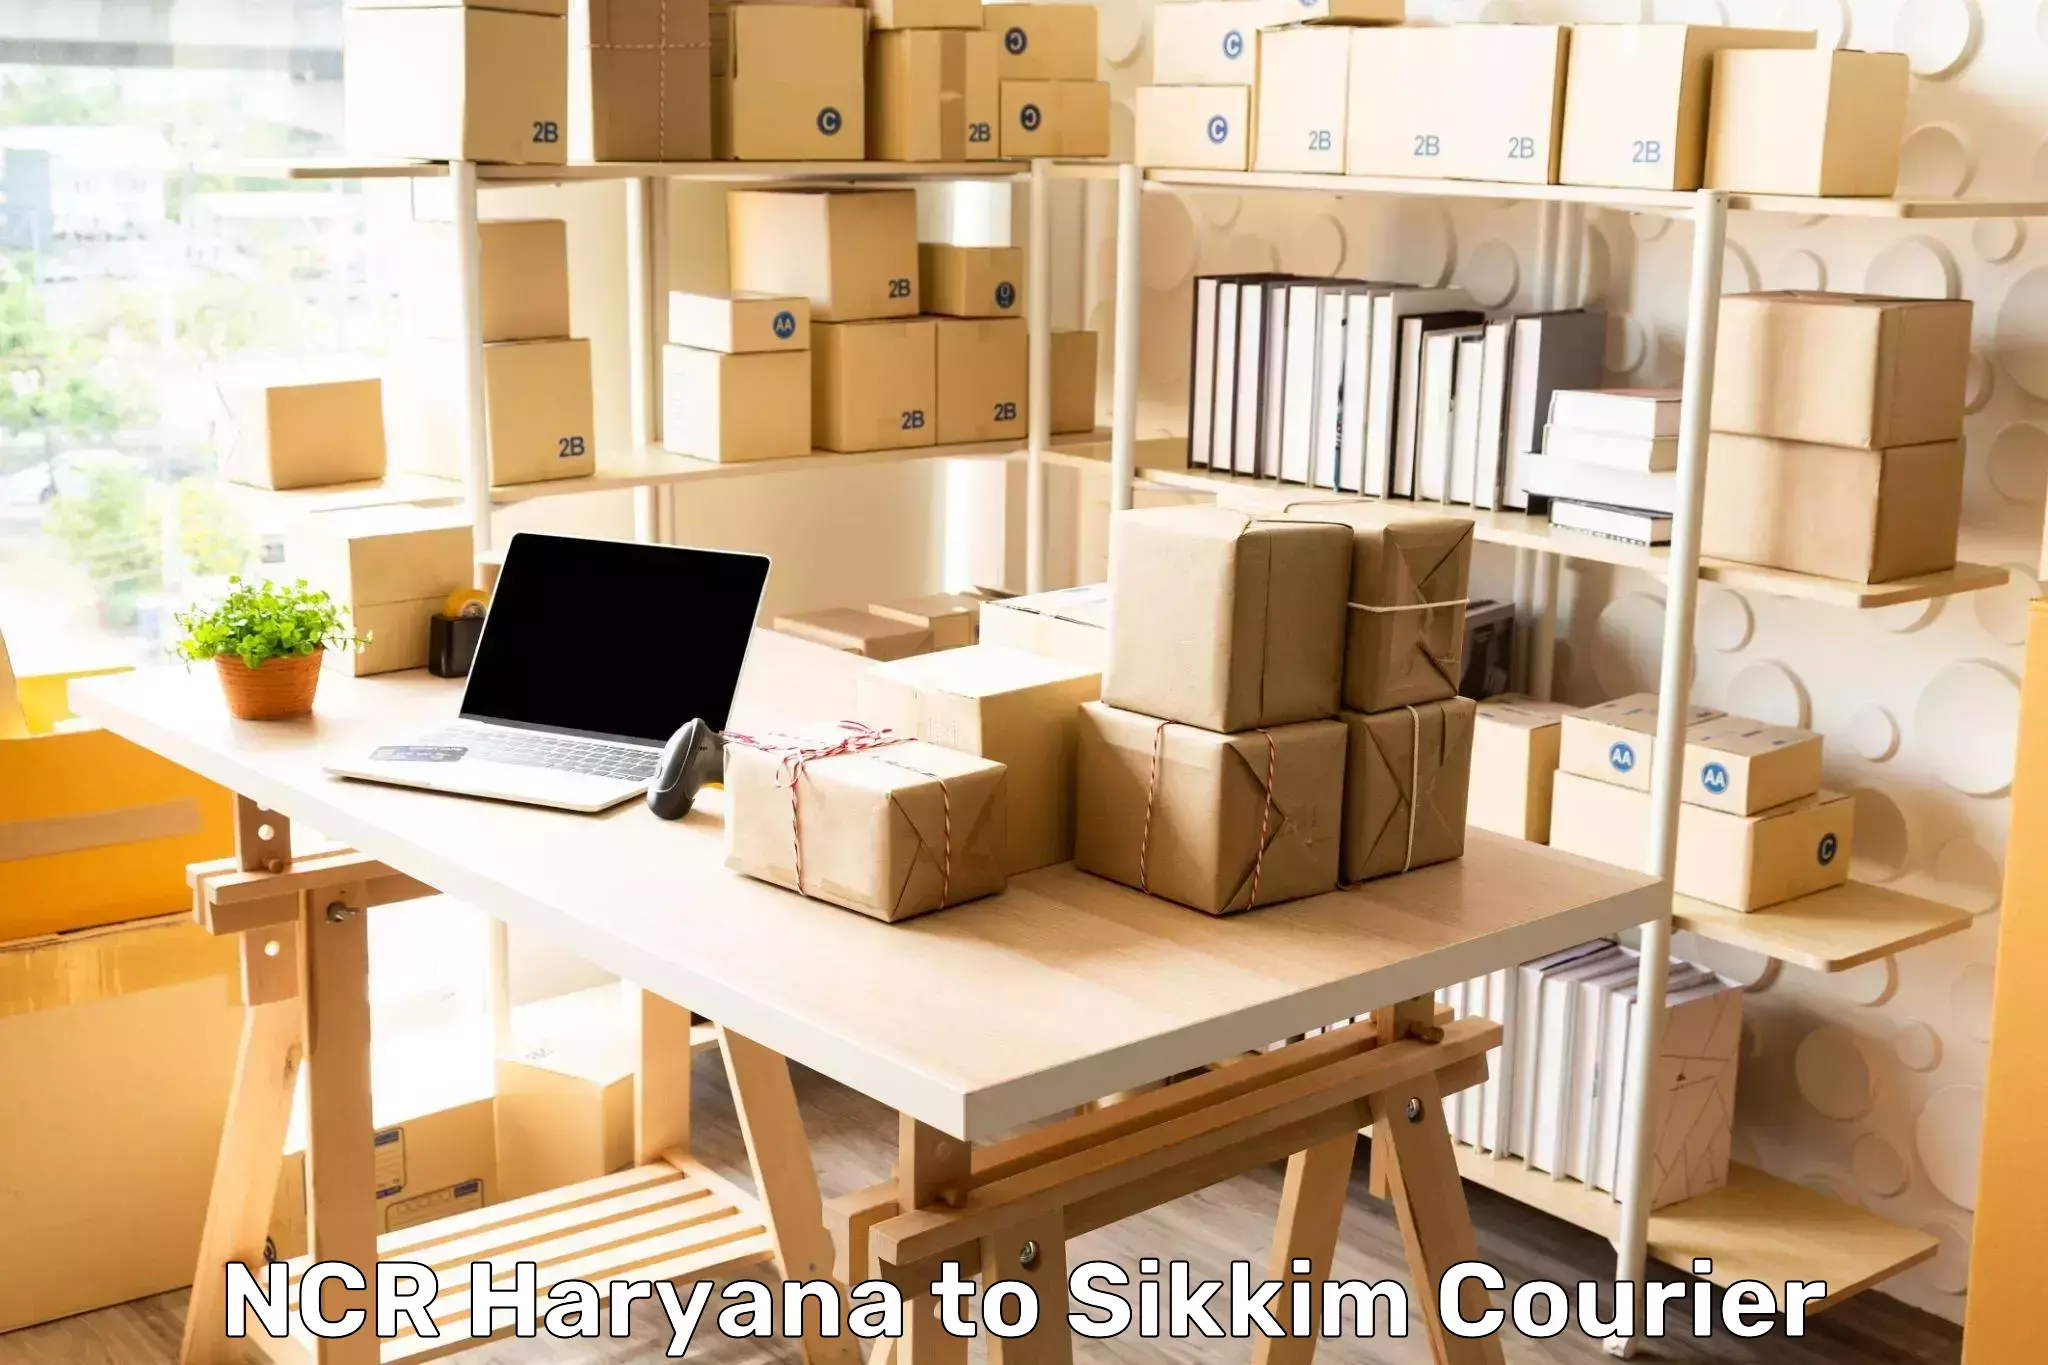 Residential courier service NCR Haryana to Sikkim